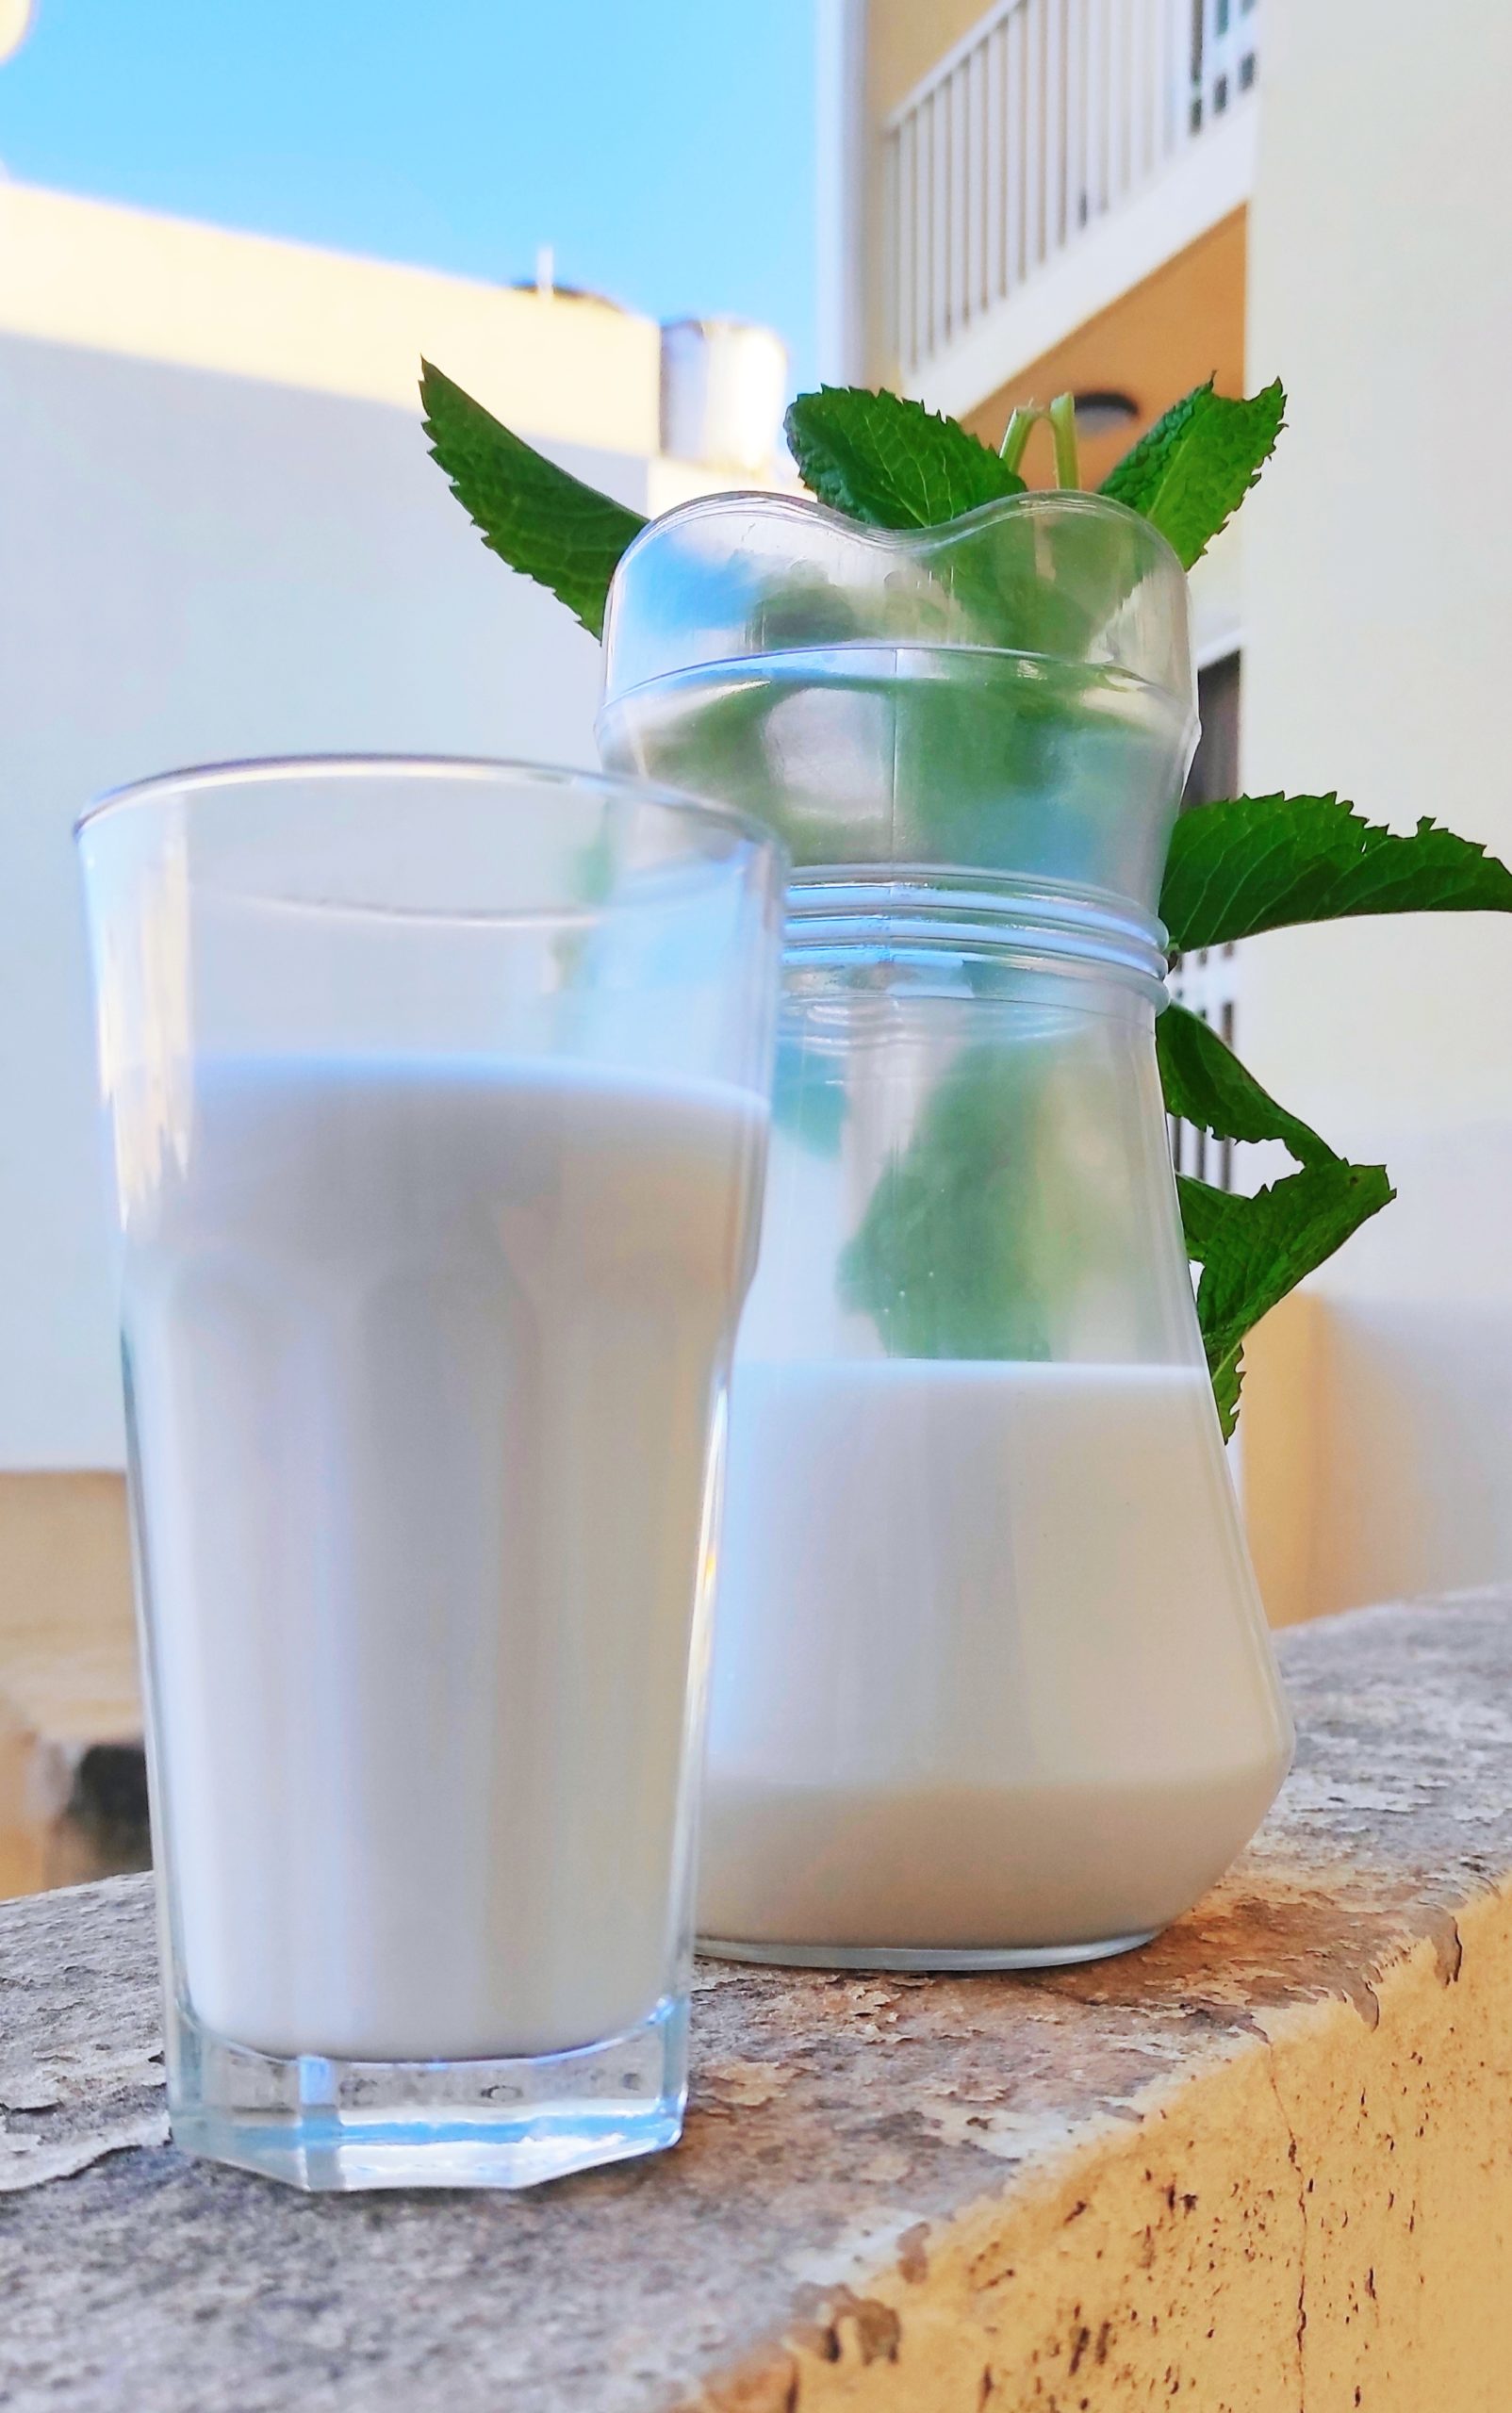 a tall glass of hemp milk next to a bigger carafe of hemp milk. There is a house plant in the background.